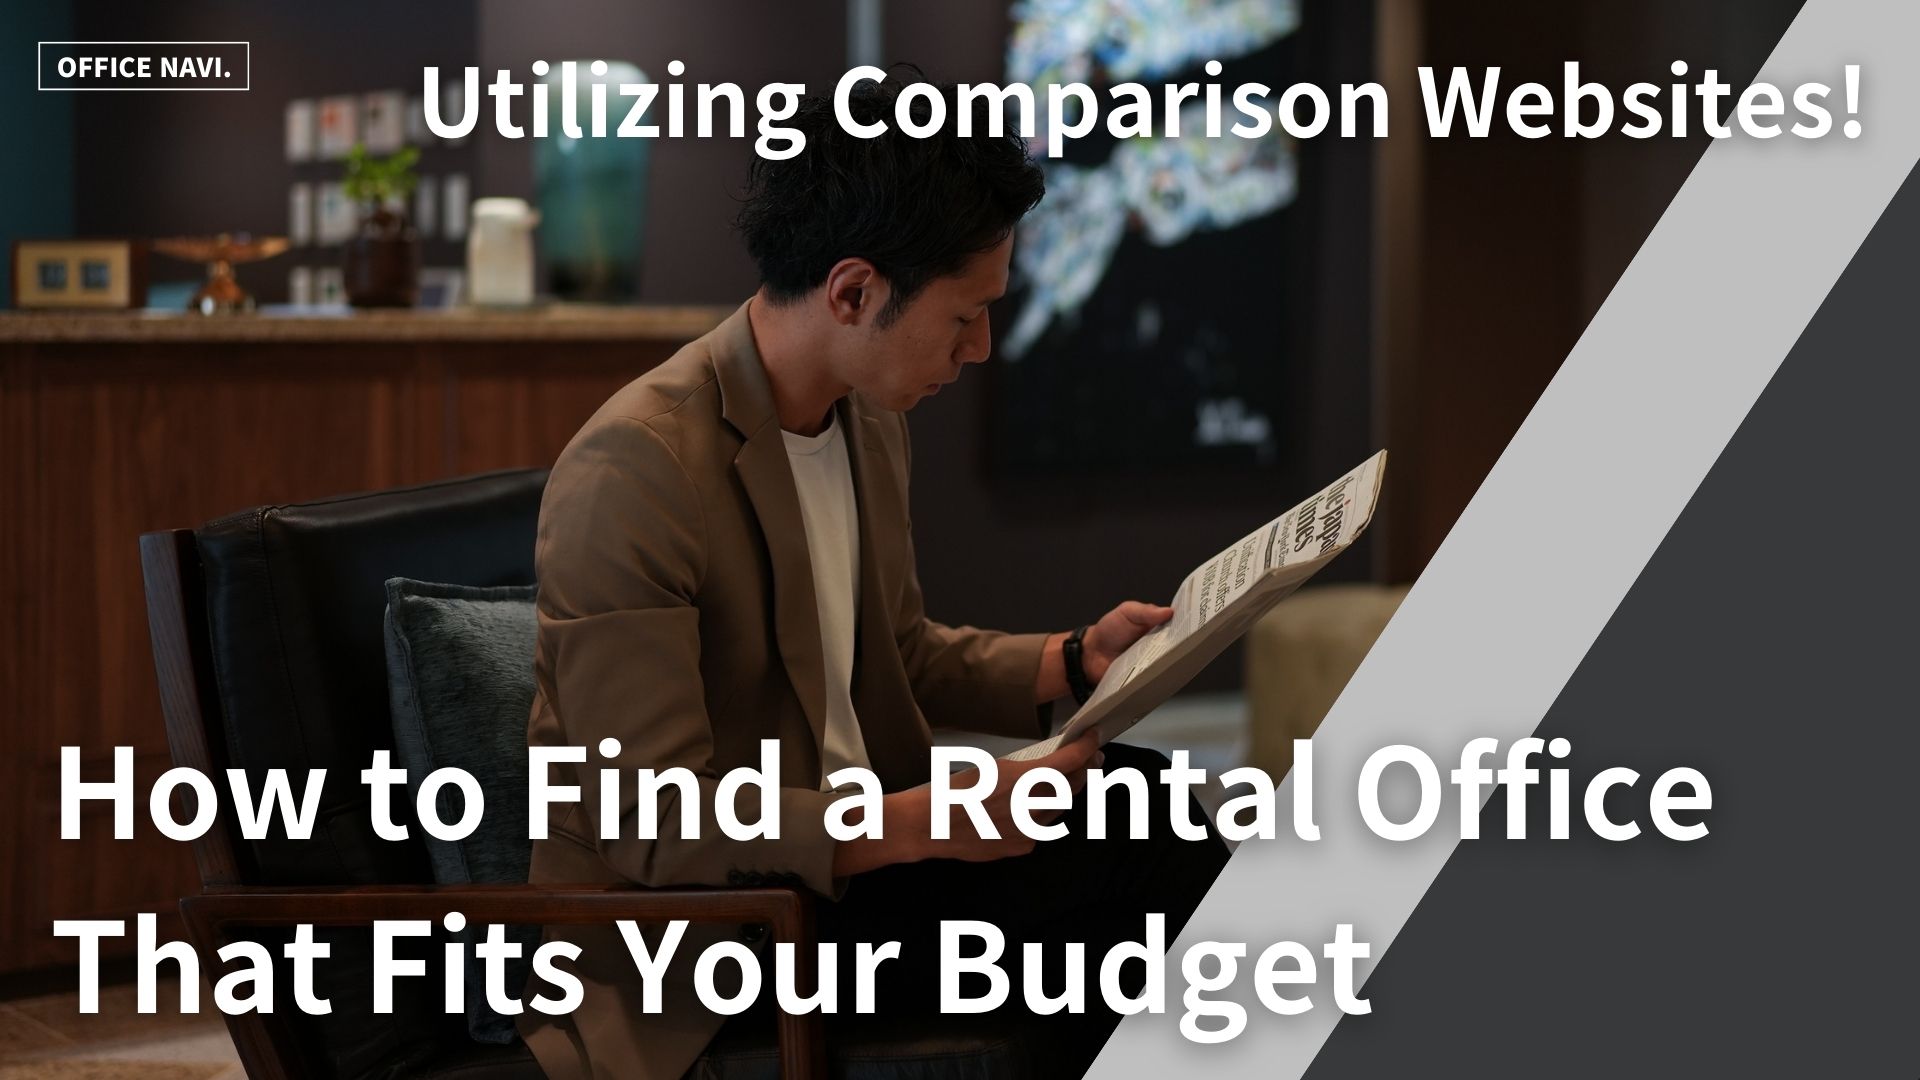 Utilizing Comparison Websites! How to Find a Rental Office That Fits Your Budget